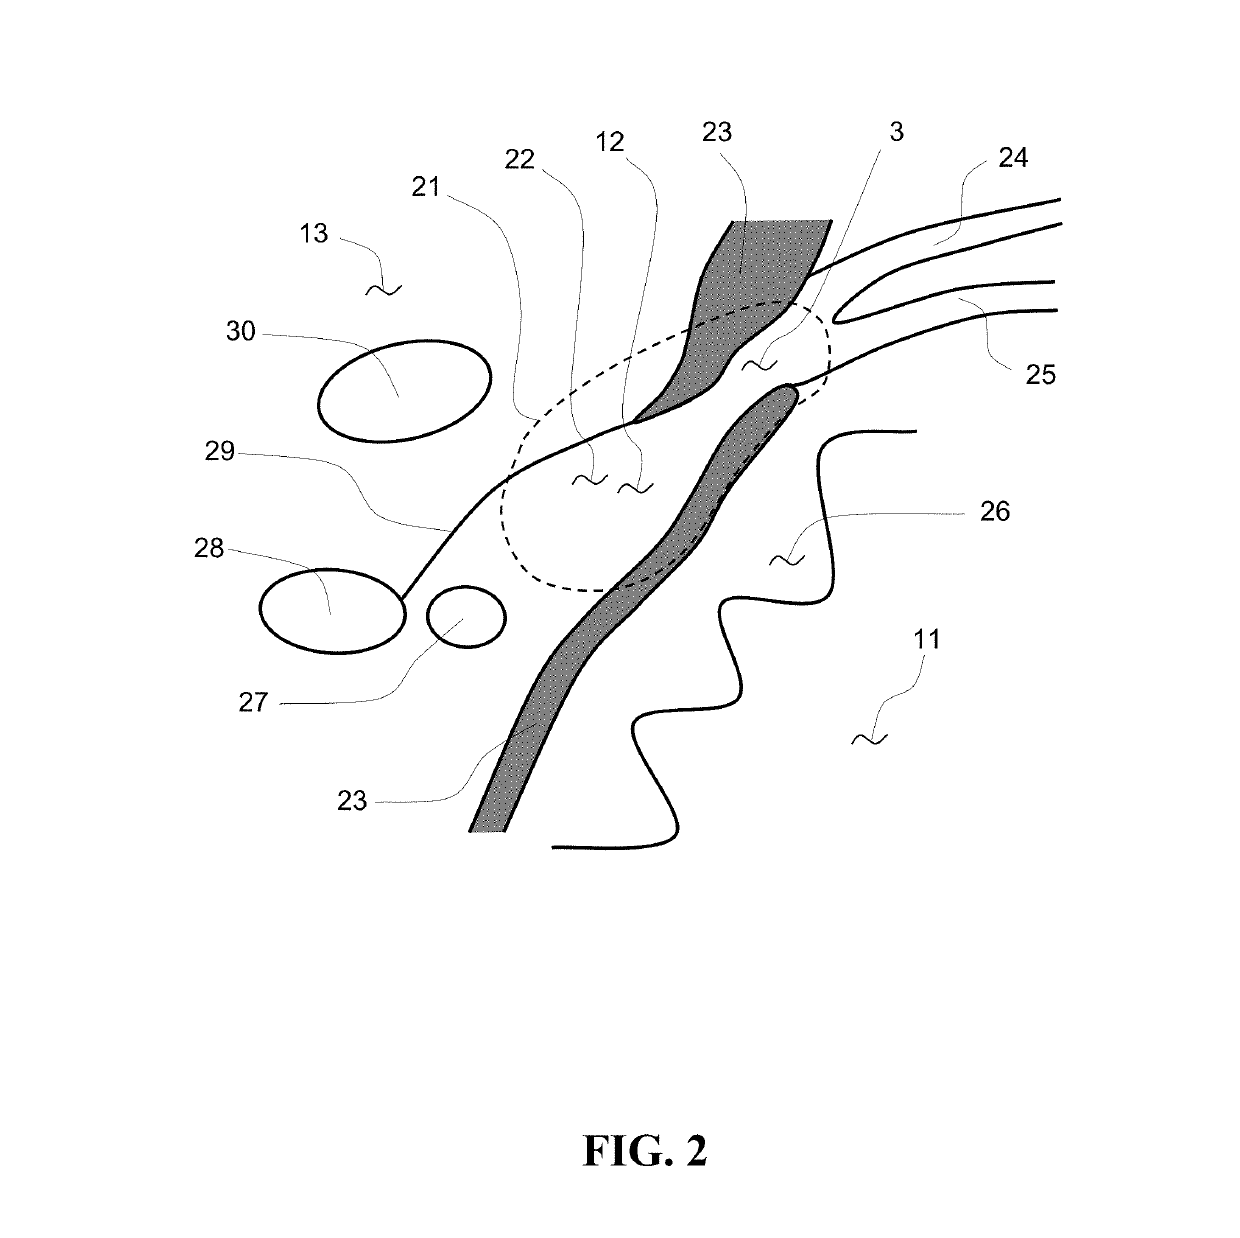 Single conduit multi-electrode cardiac pacemaker and methods of using thereof